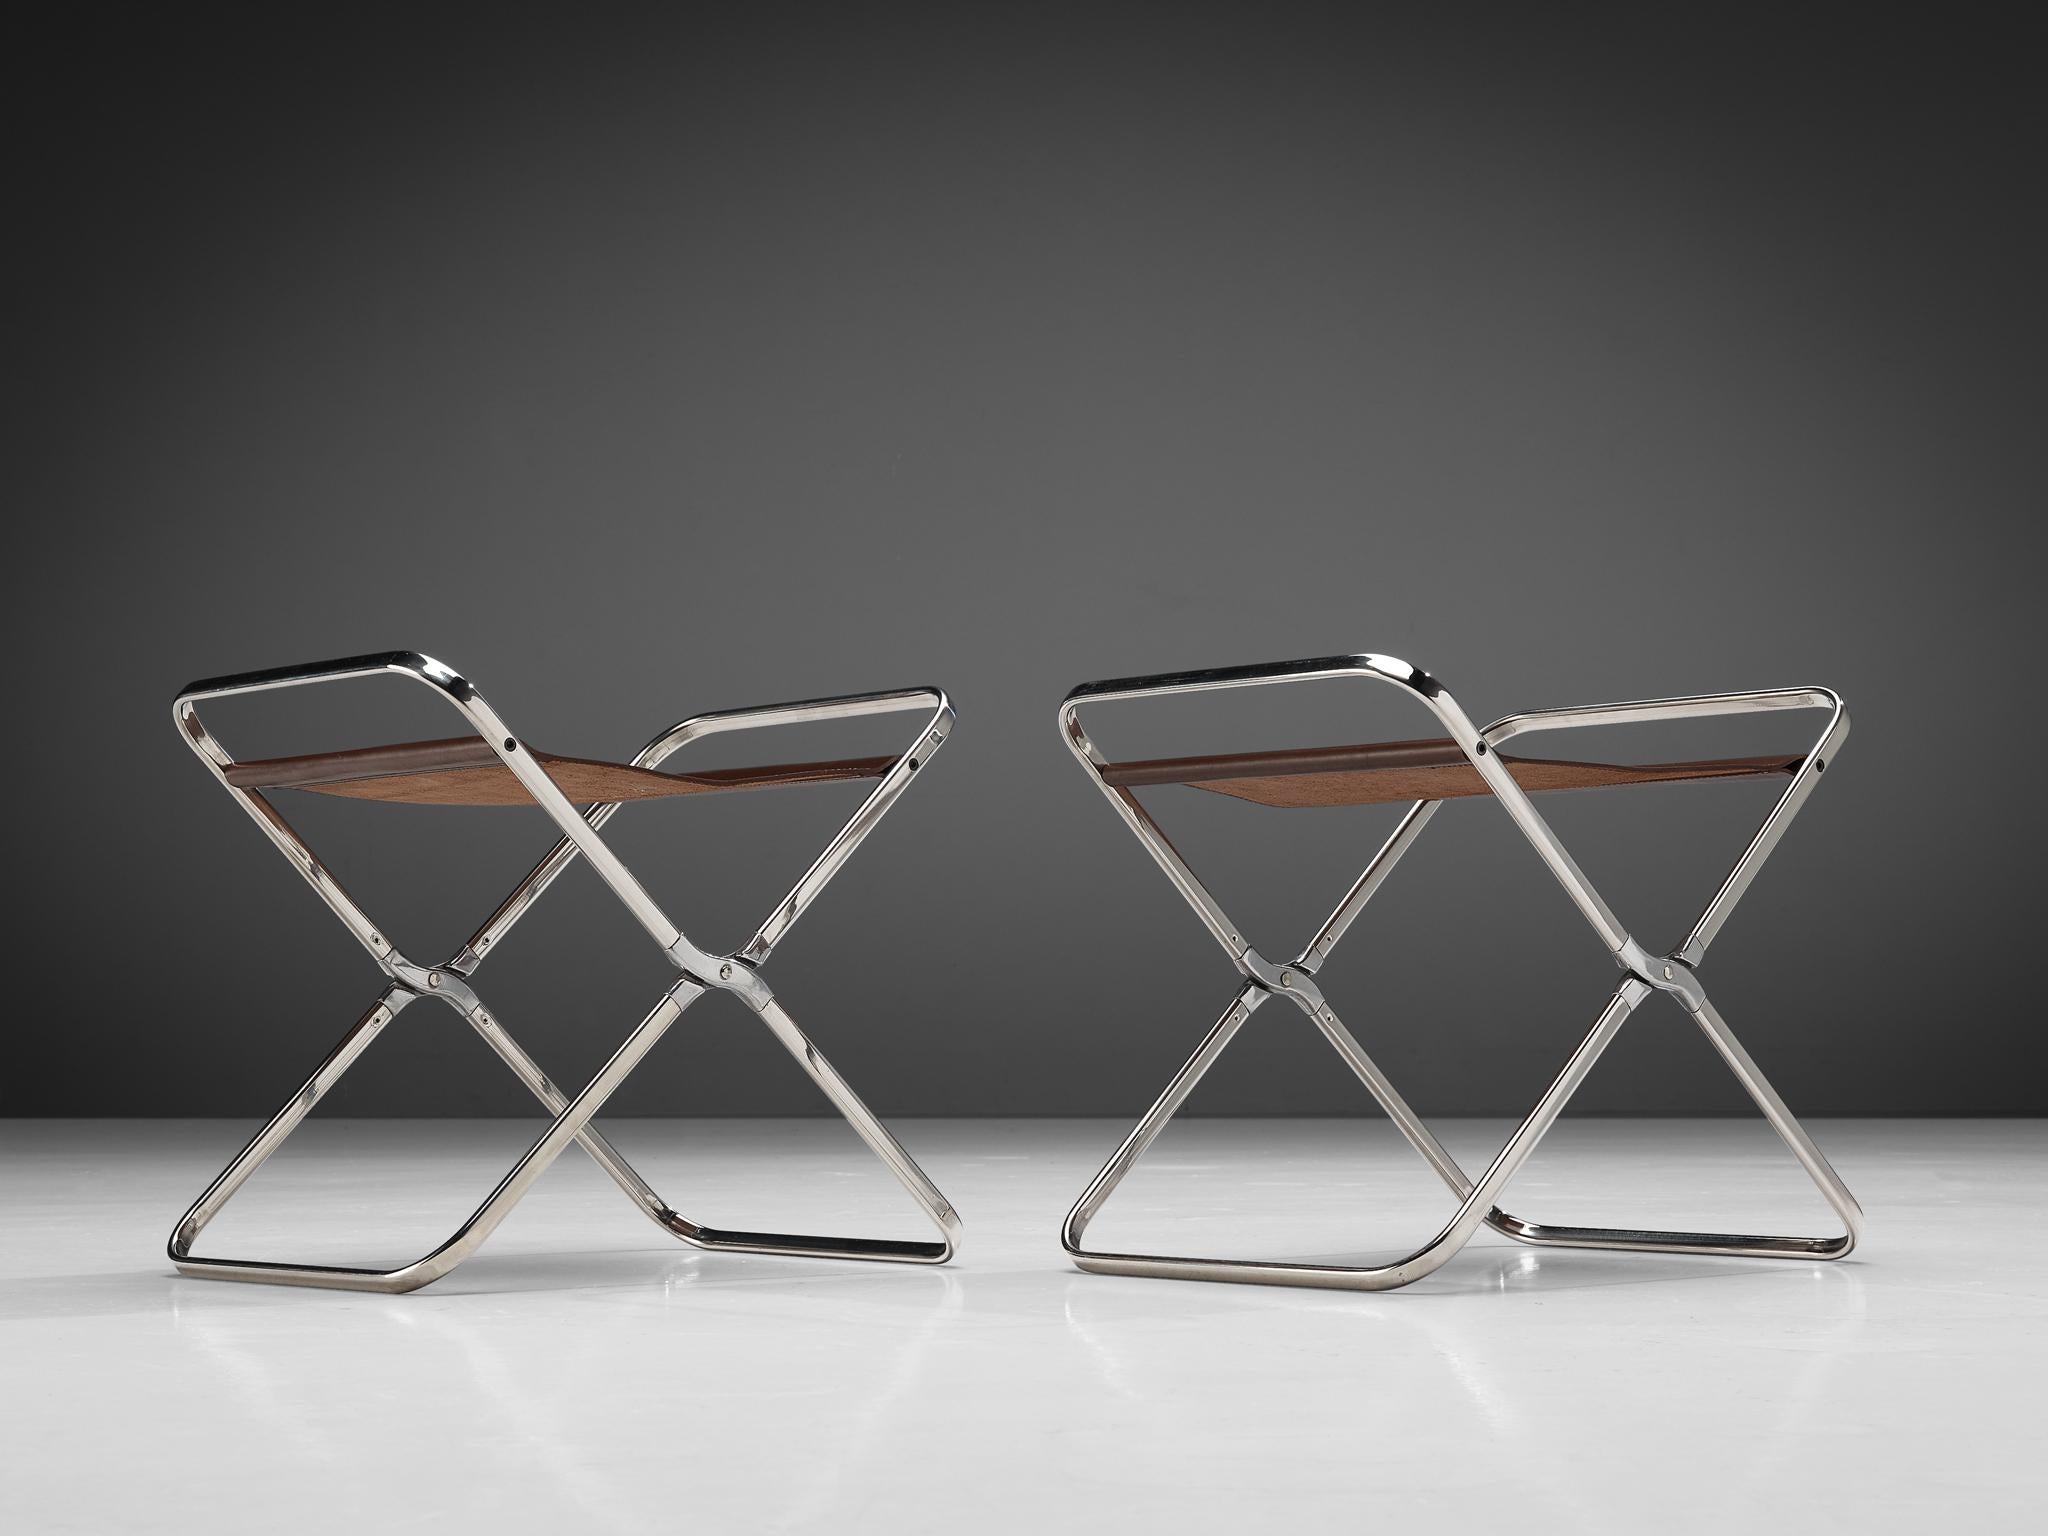 Gae Aulenti for Zanotta 'April' Folding Stools in Stainless Steel and Leather 3